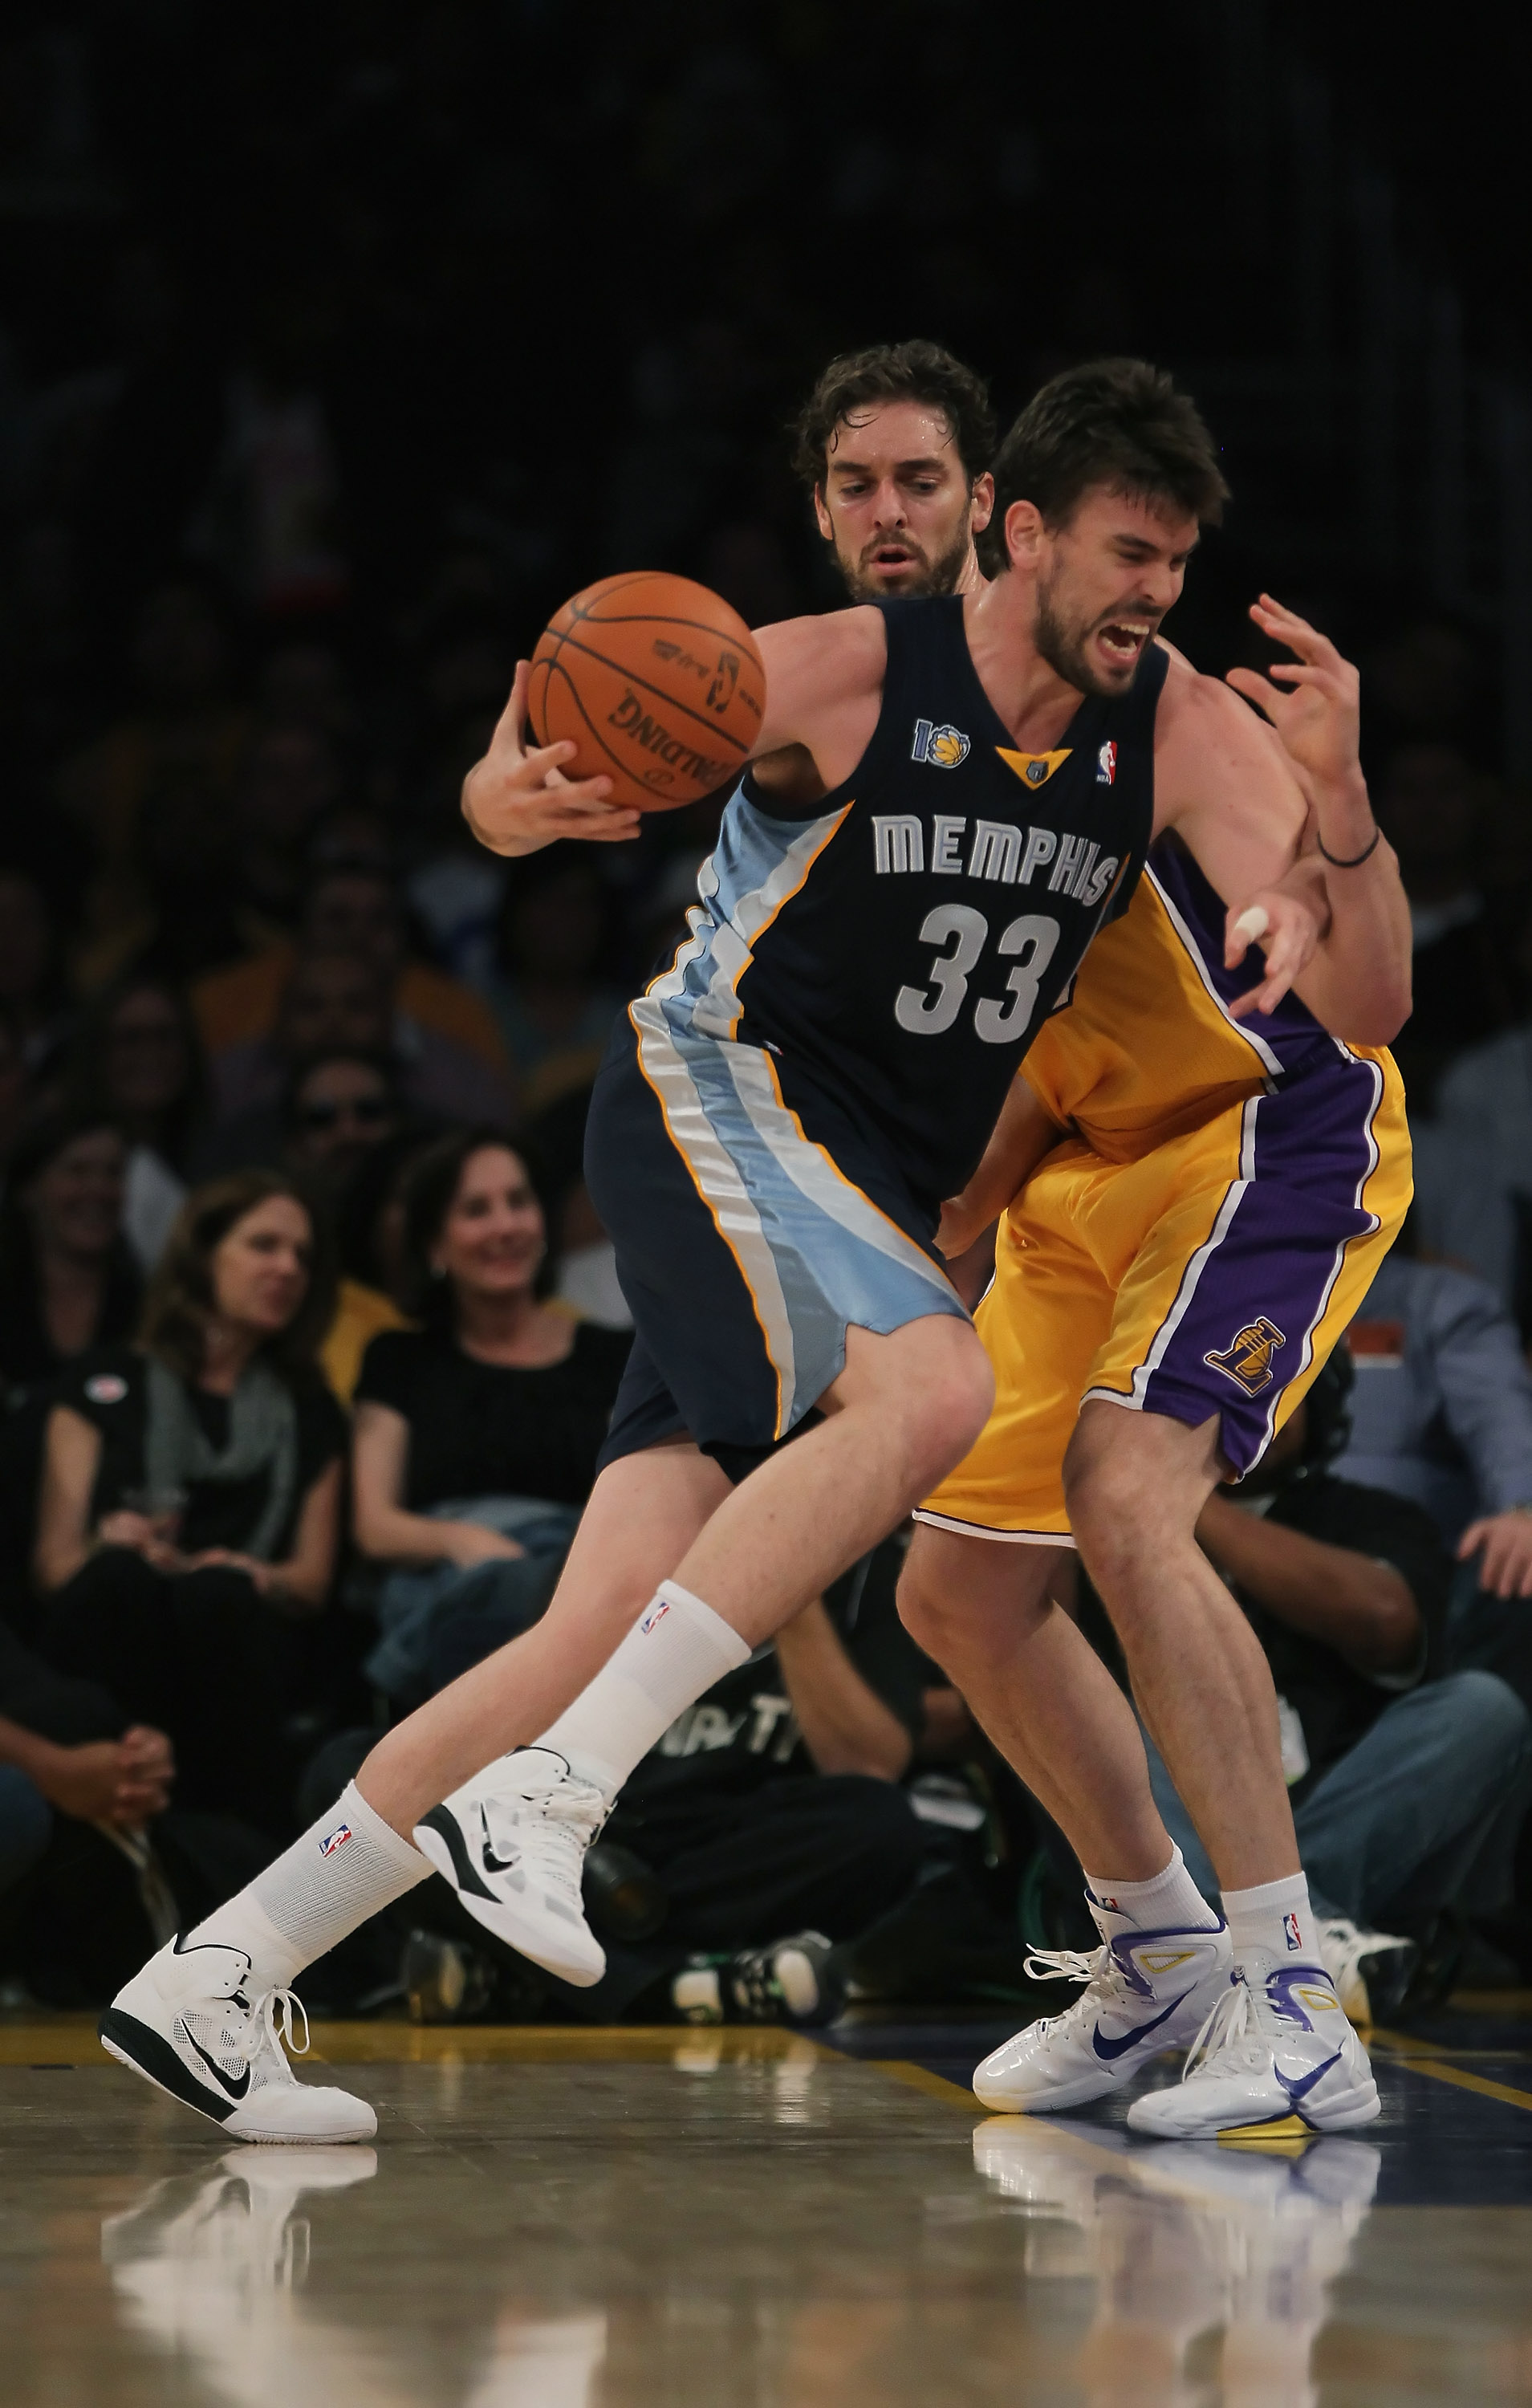 LOS ANGELES, CA - NOVEMBER 02:  Marc Gasol #33 of the Memphis Grizzlies drives past Pau Gasol #16 of the Los Angeles Lakers to the basket during the first quarter at Staples Center on November 2, 2010 in Los Angeles, California. NOTE TO USER: User express